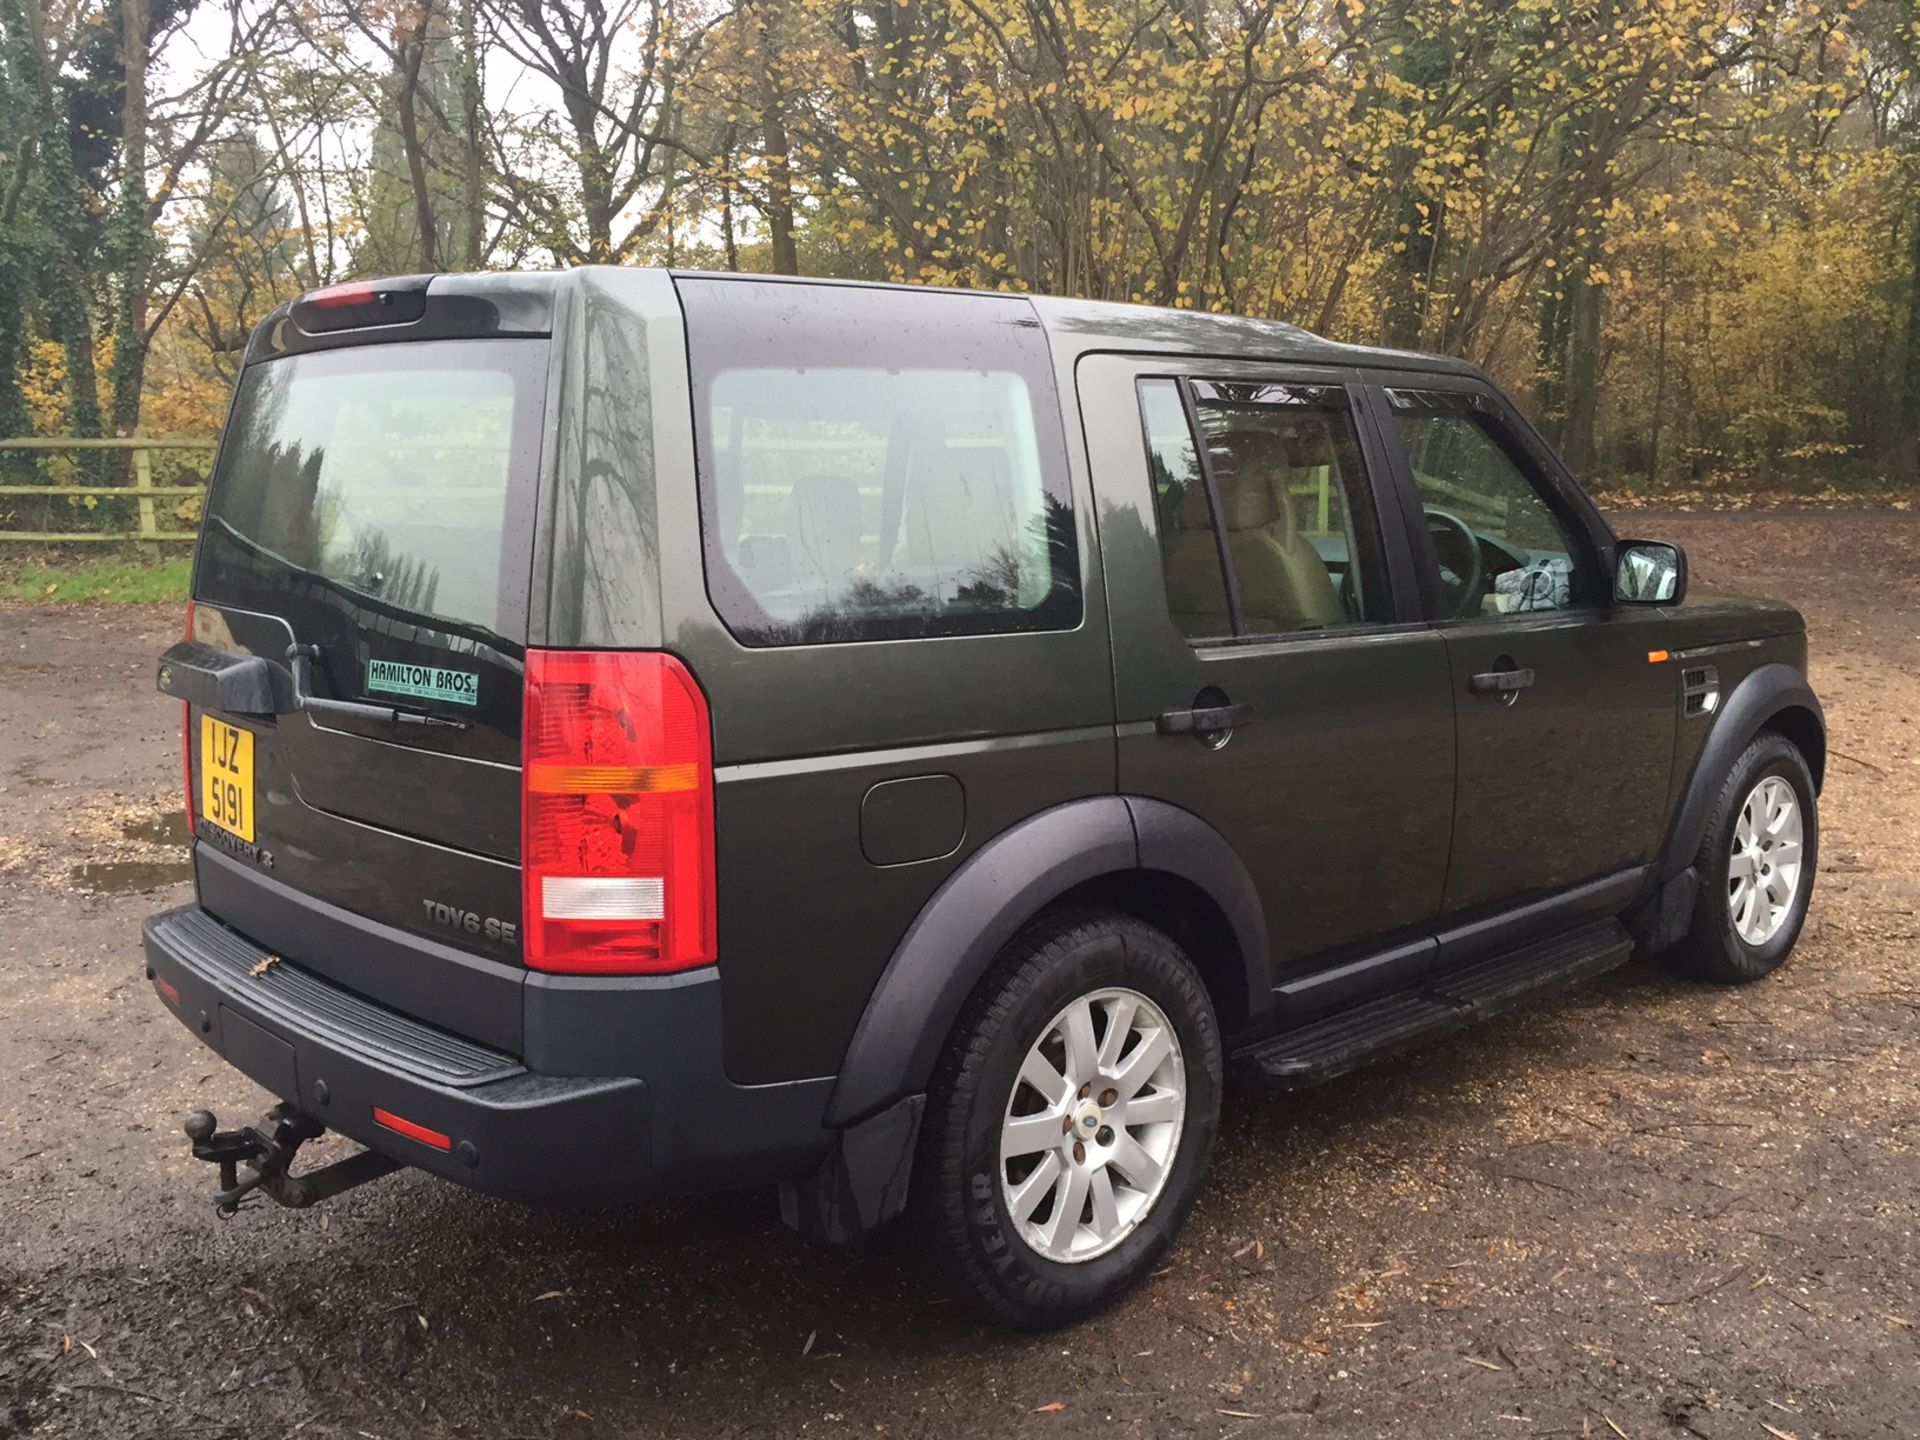 2005 LAND ROVER DISCOVERY 3 TDV6 SE 7 SEAT MANUAL ONE FORMER KEEPER FULL SERVICE HISTORY *NO VAT* - Image 4 of 27